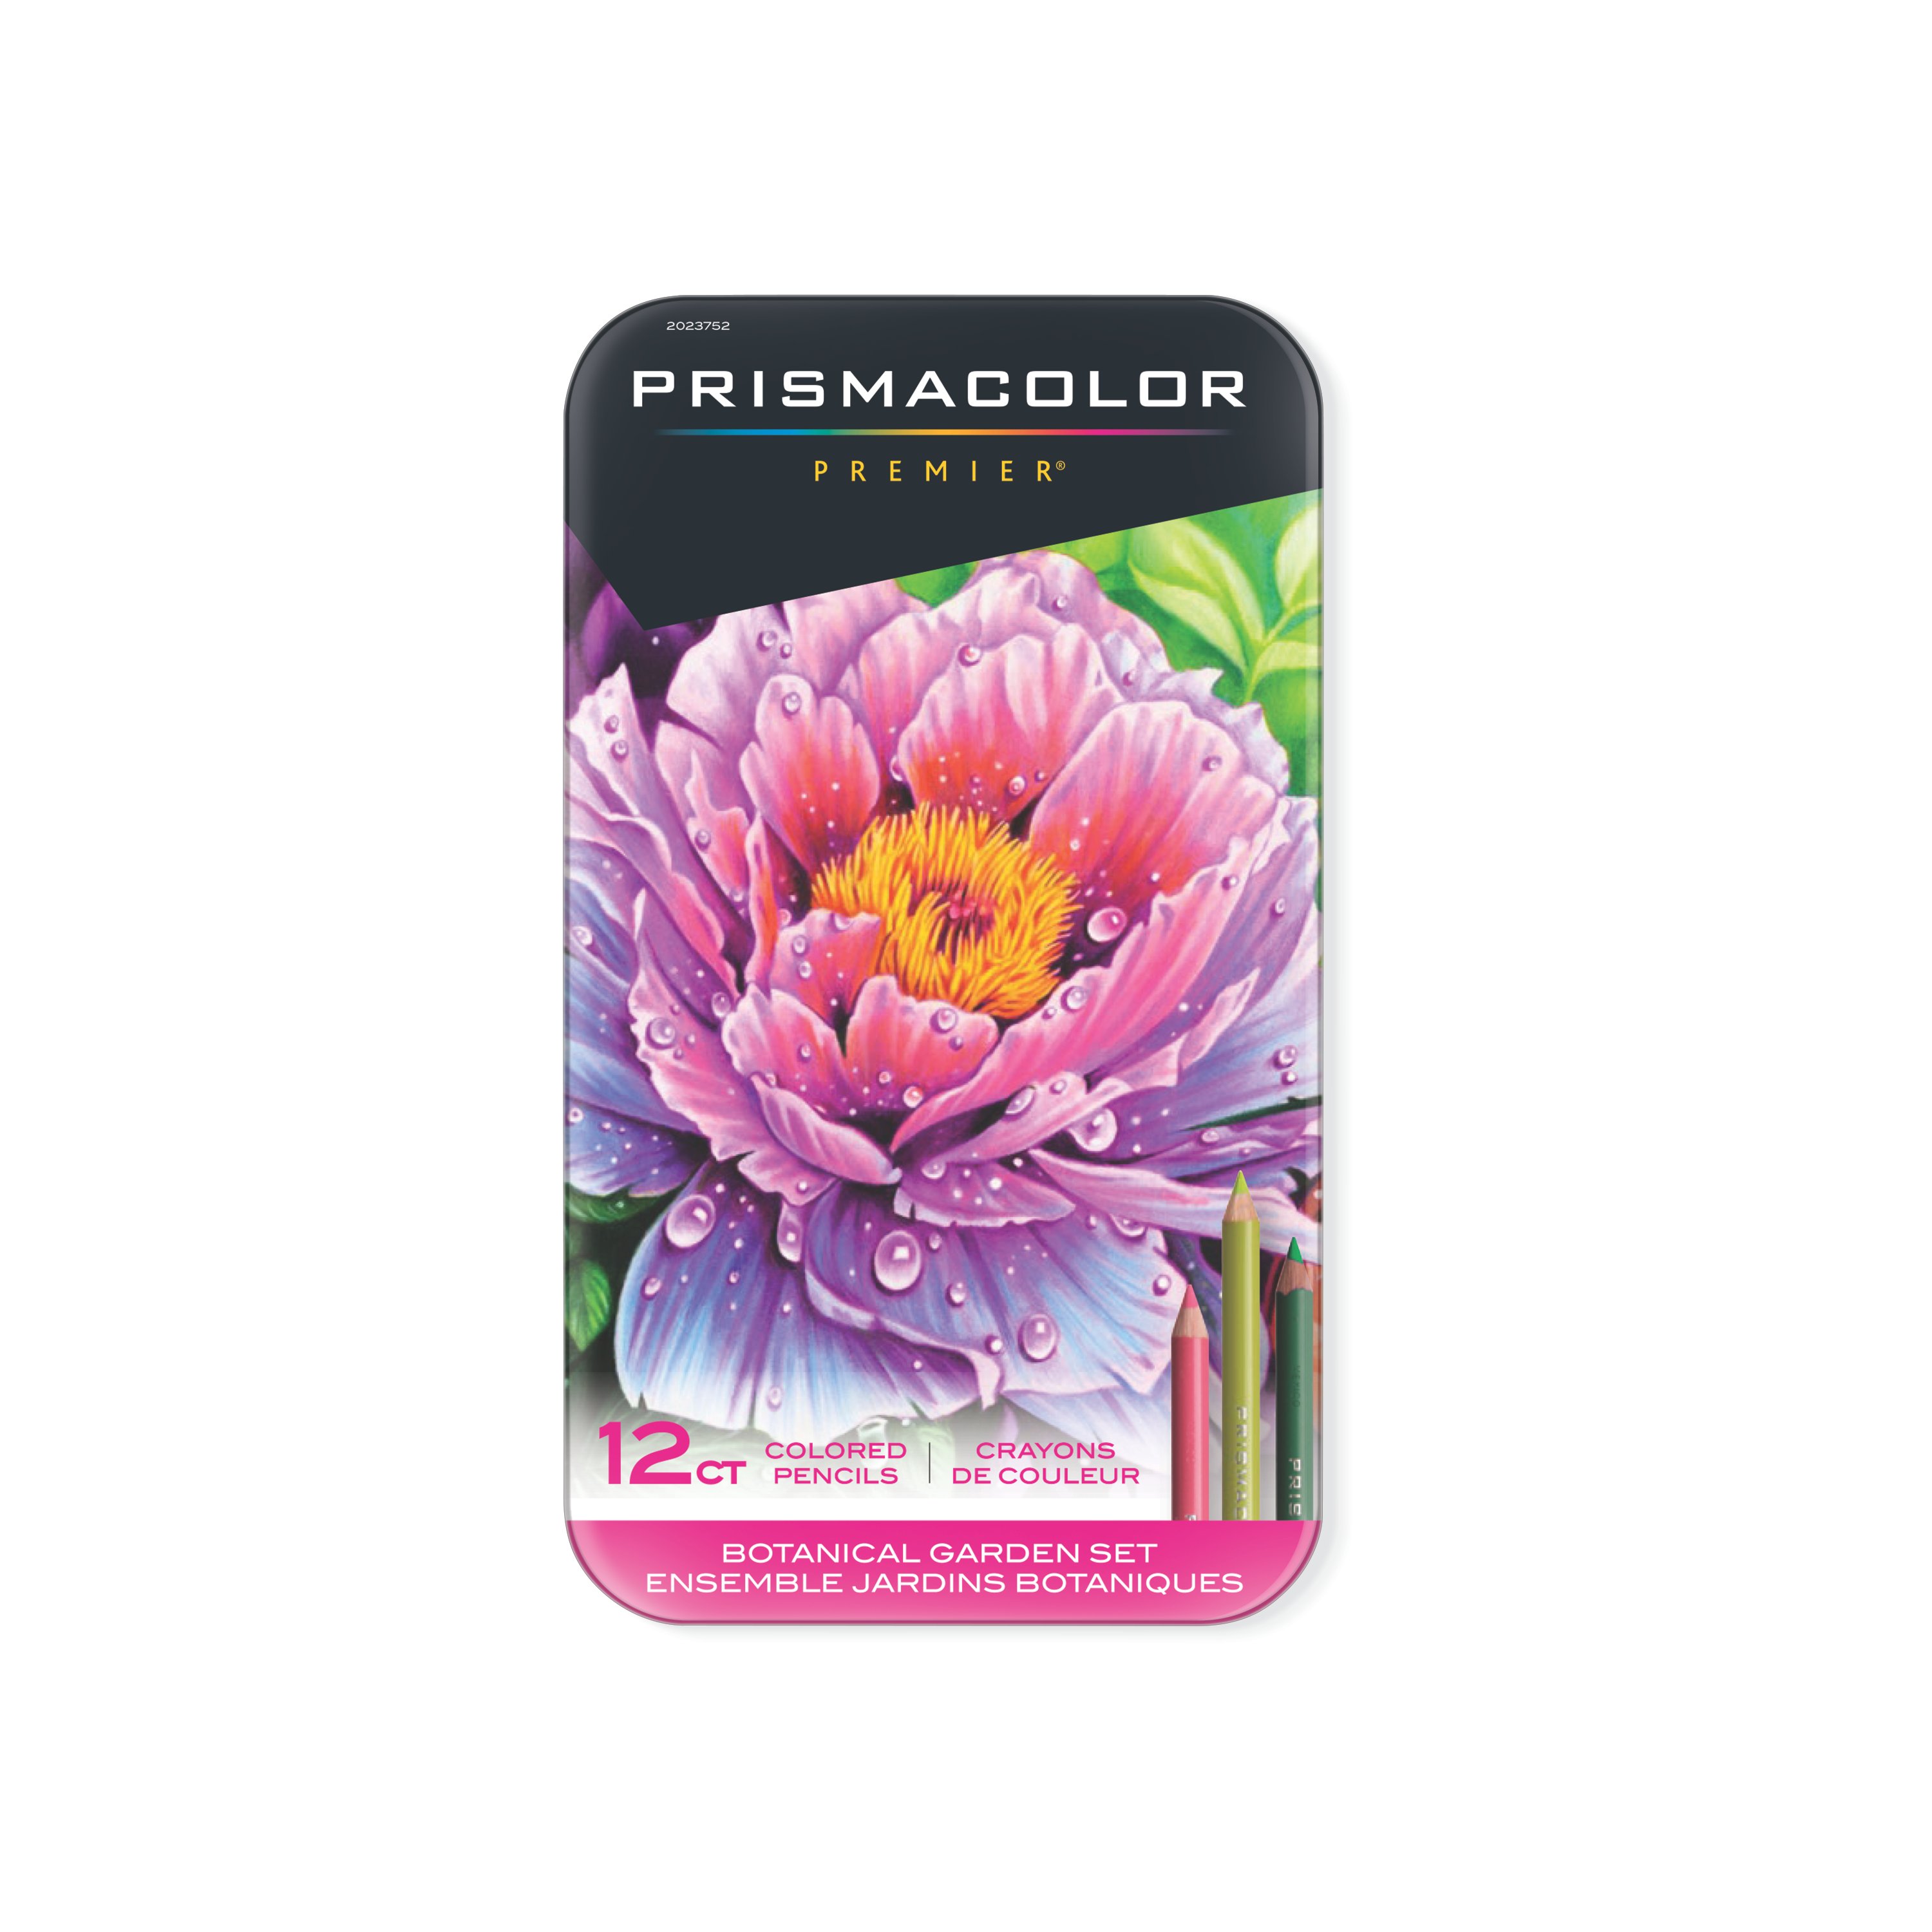 https://s7d9.scene7.com/is/image/NewellRubbermaid/2023752-prismacolor-botanical-garden-colored-pencil-set-12ct-in-pack-1-2